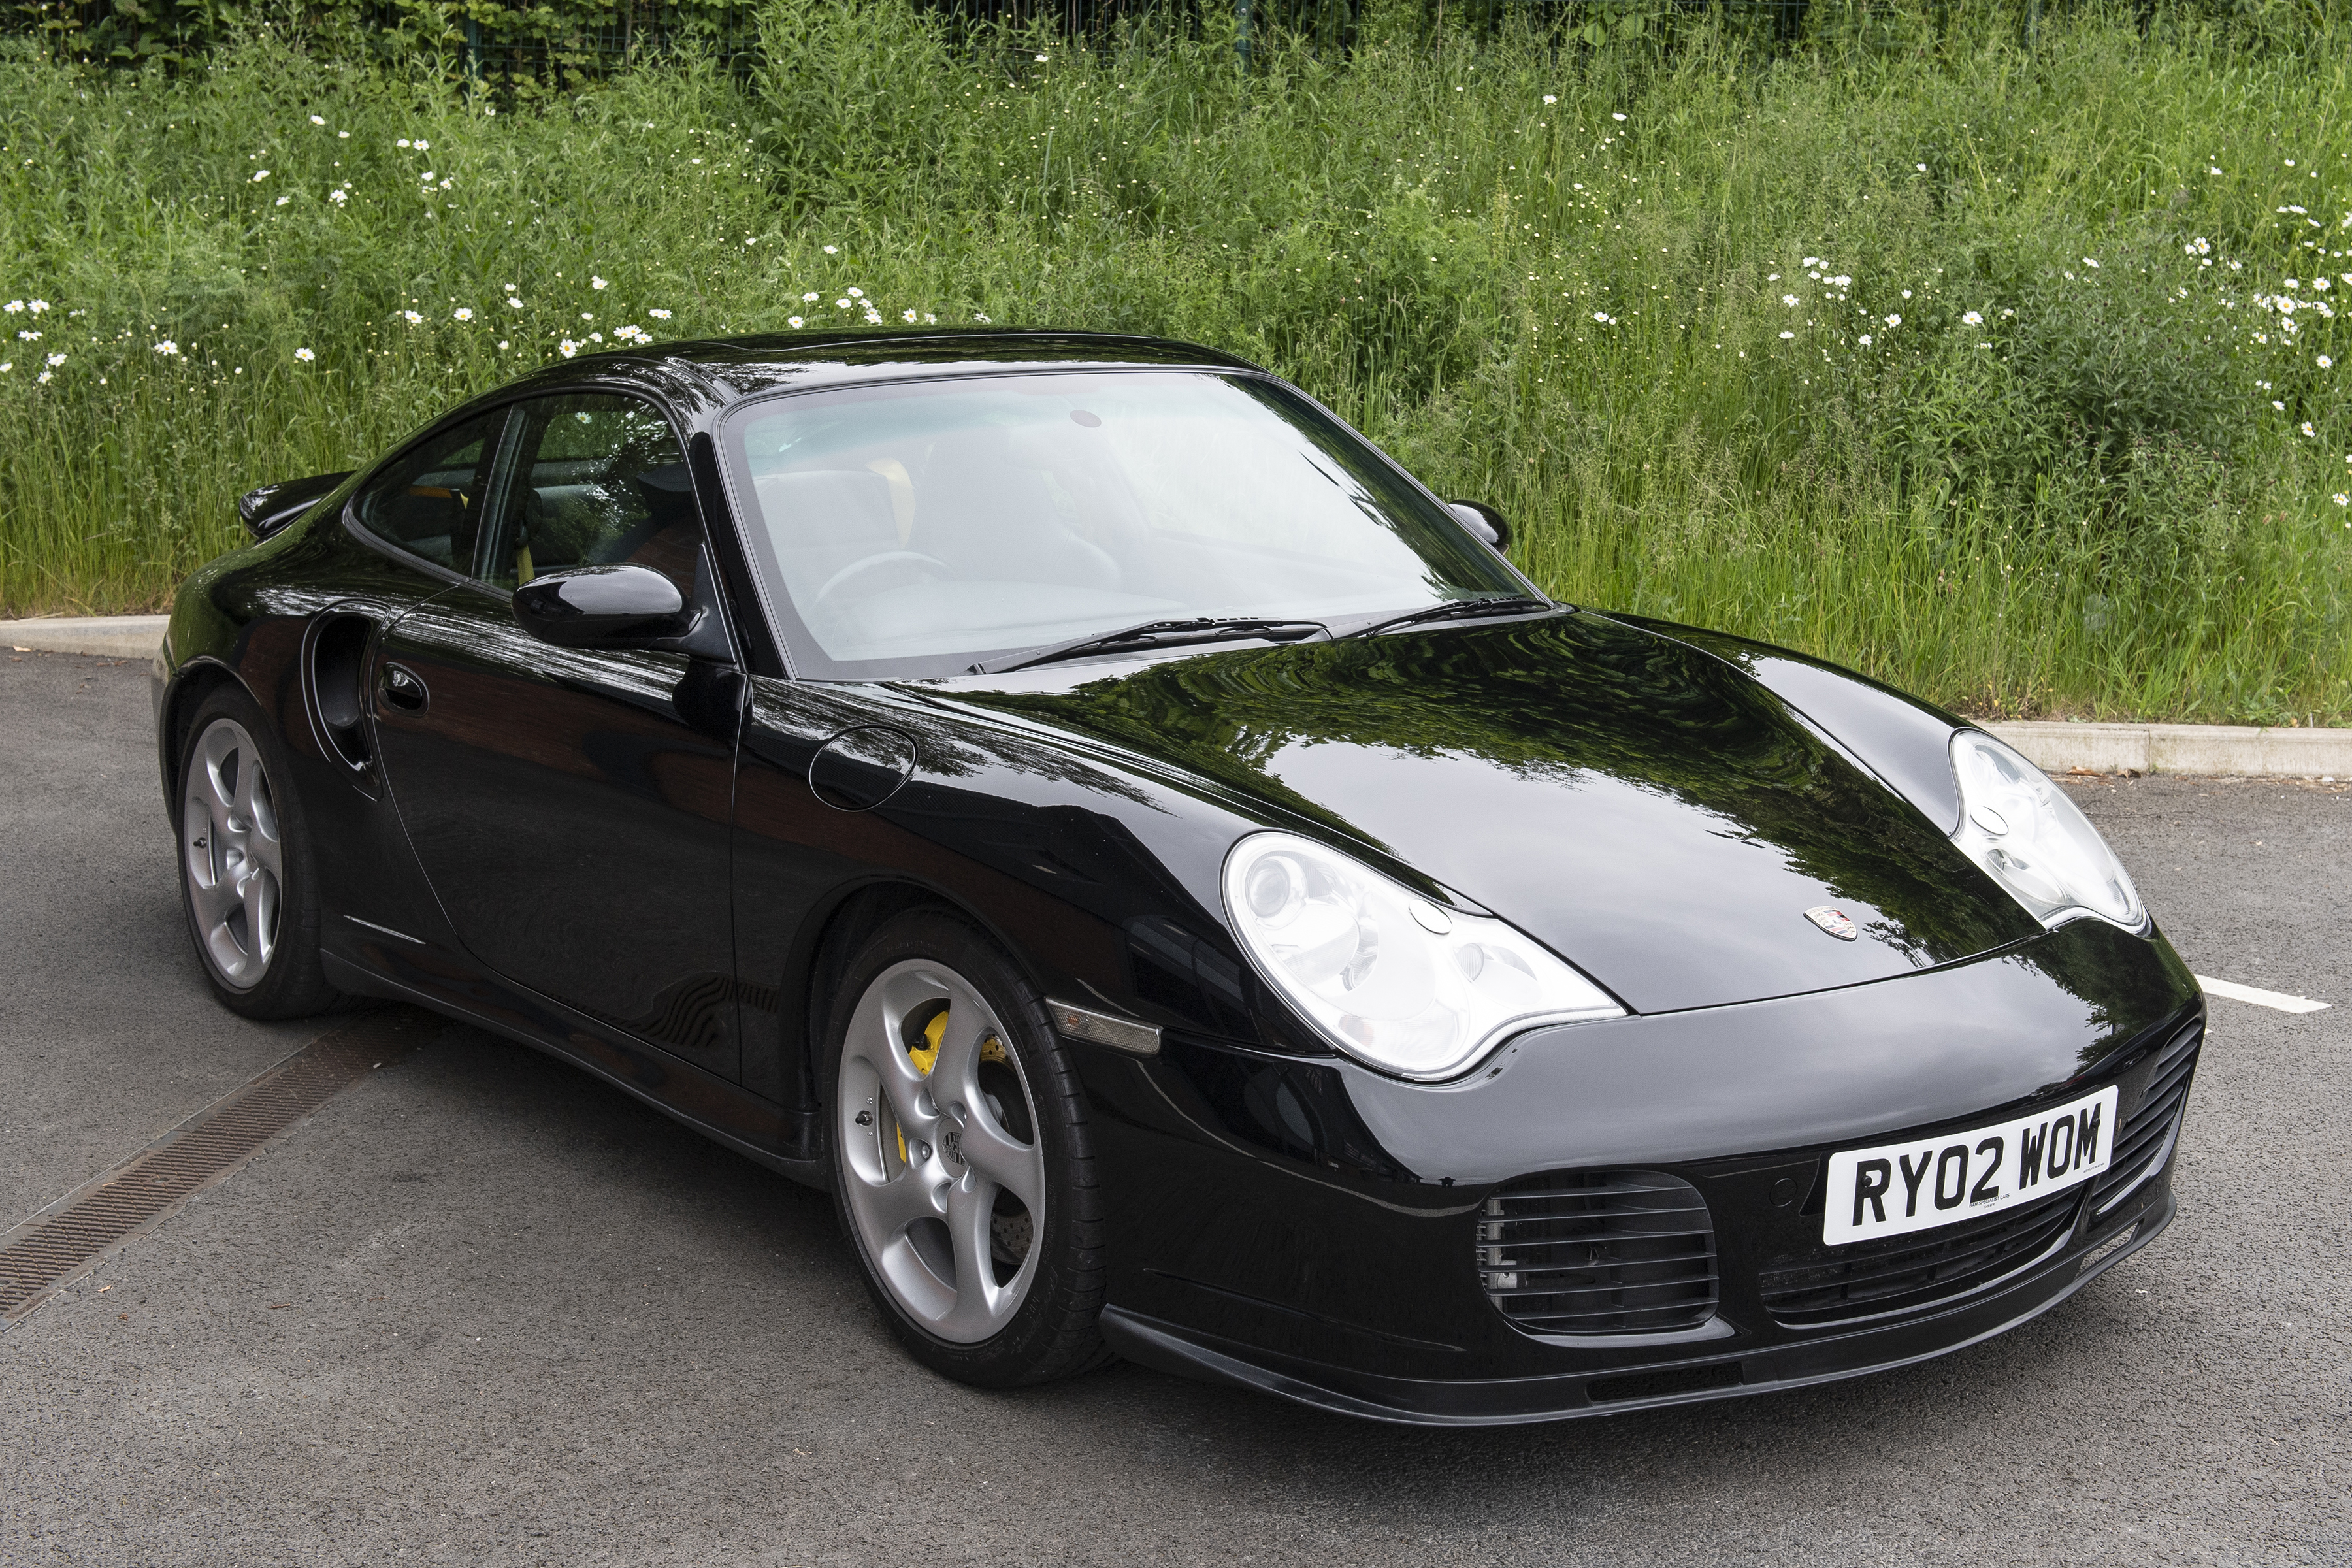 2002 PORSCHE 911 (996) TURBO for sale by auction in Chesterfield, Derbyshire, United Kingdom pic pic